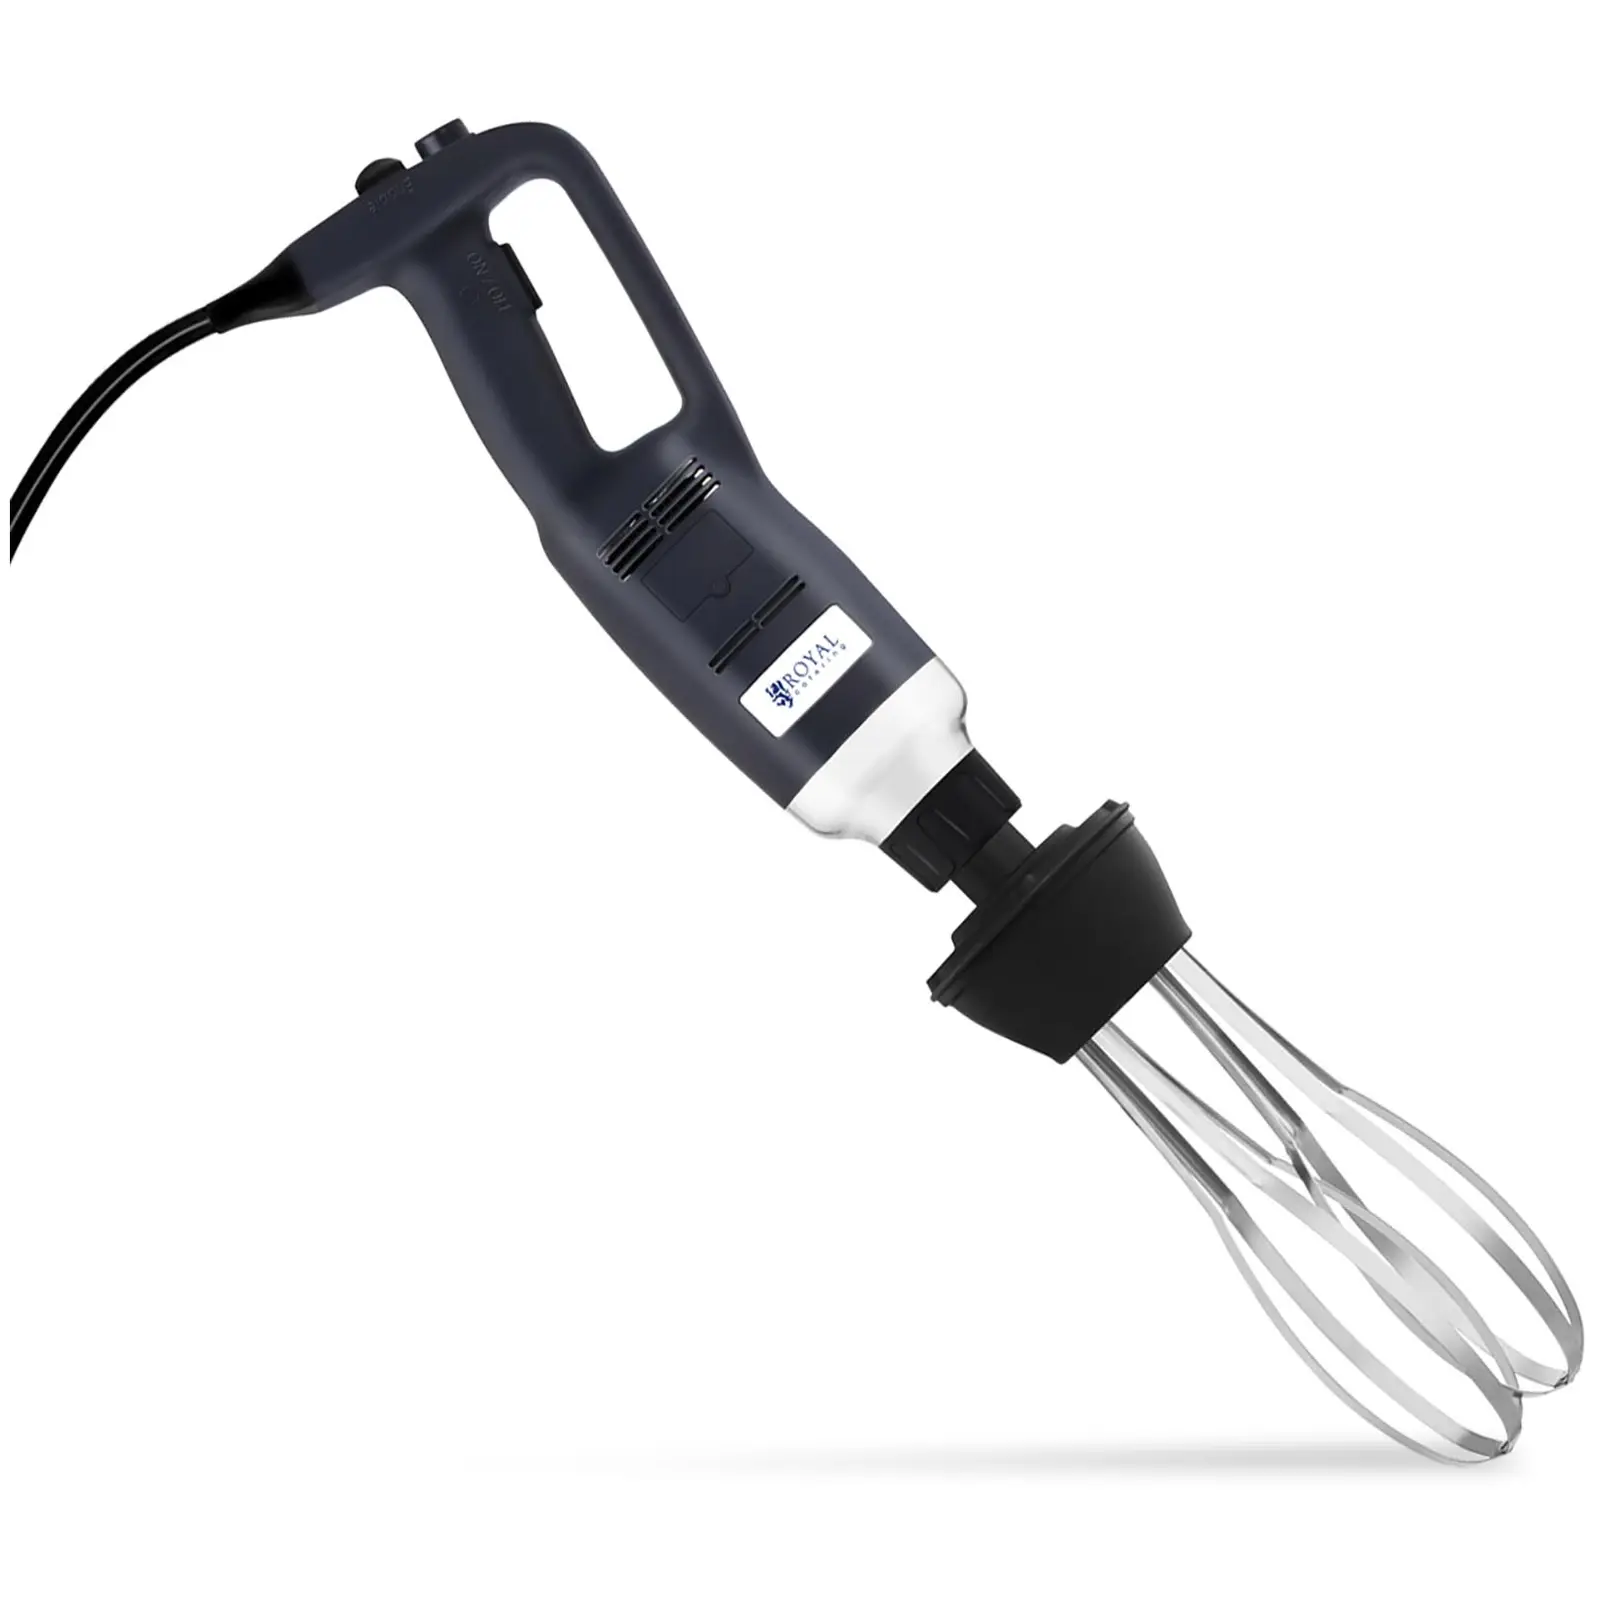 Hand blender - 500 W - with whisk